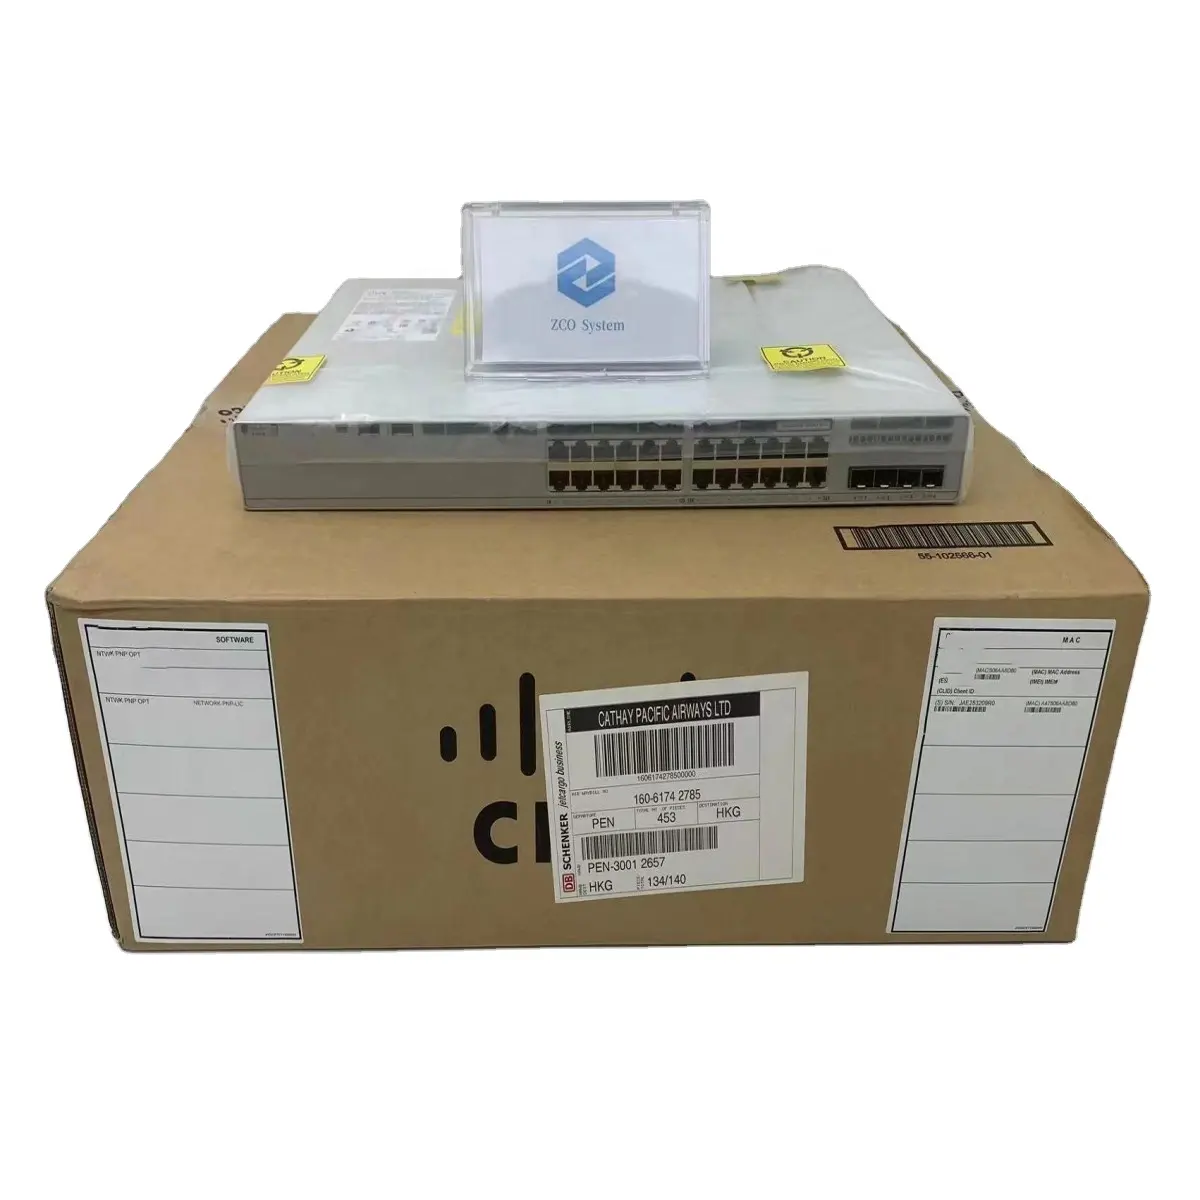 AIR-CT3504-K9 New Brand 5 Users Access Point Wireless Controller AIR-CT3504-K9